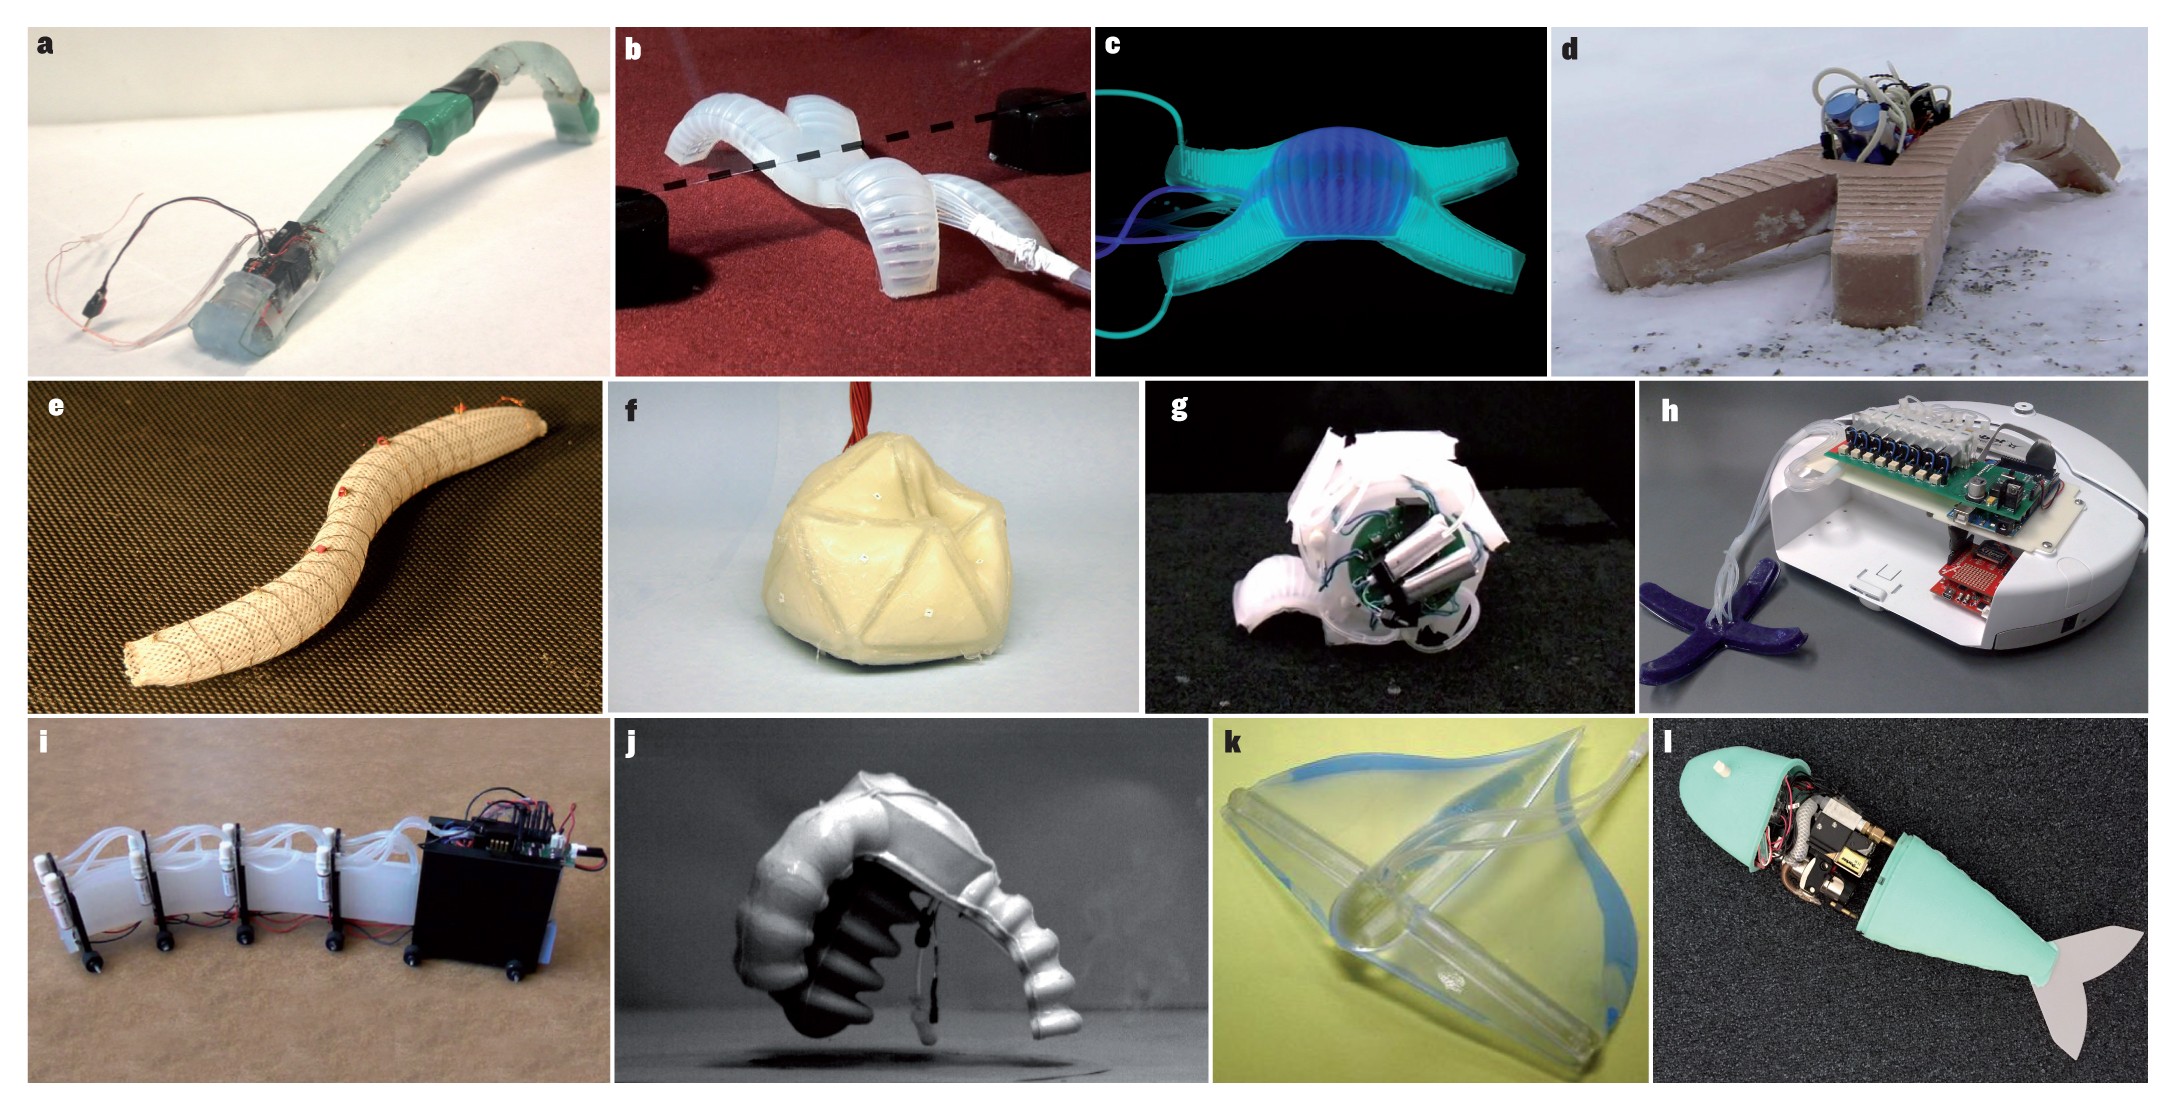 Design, fabrication and control of soft robots | Nature